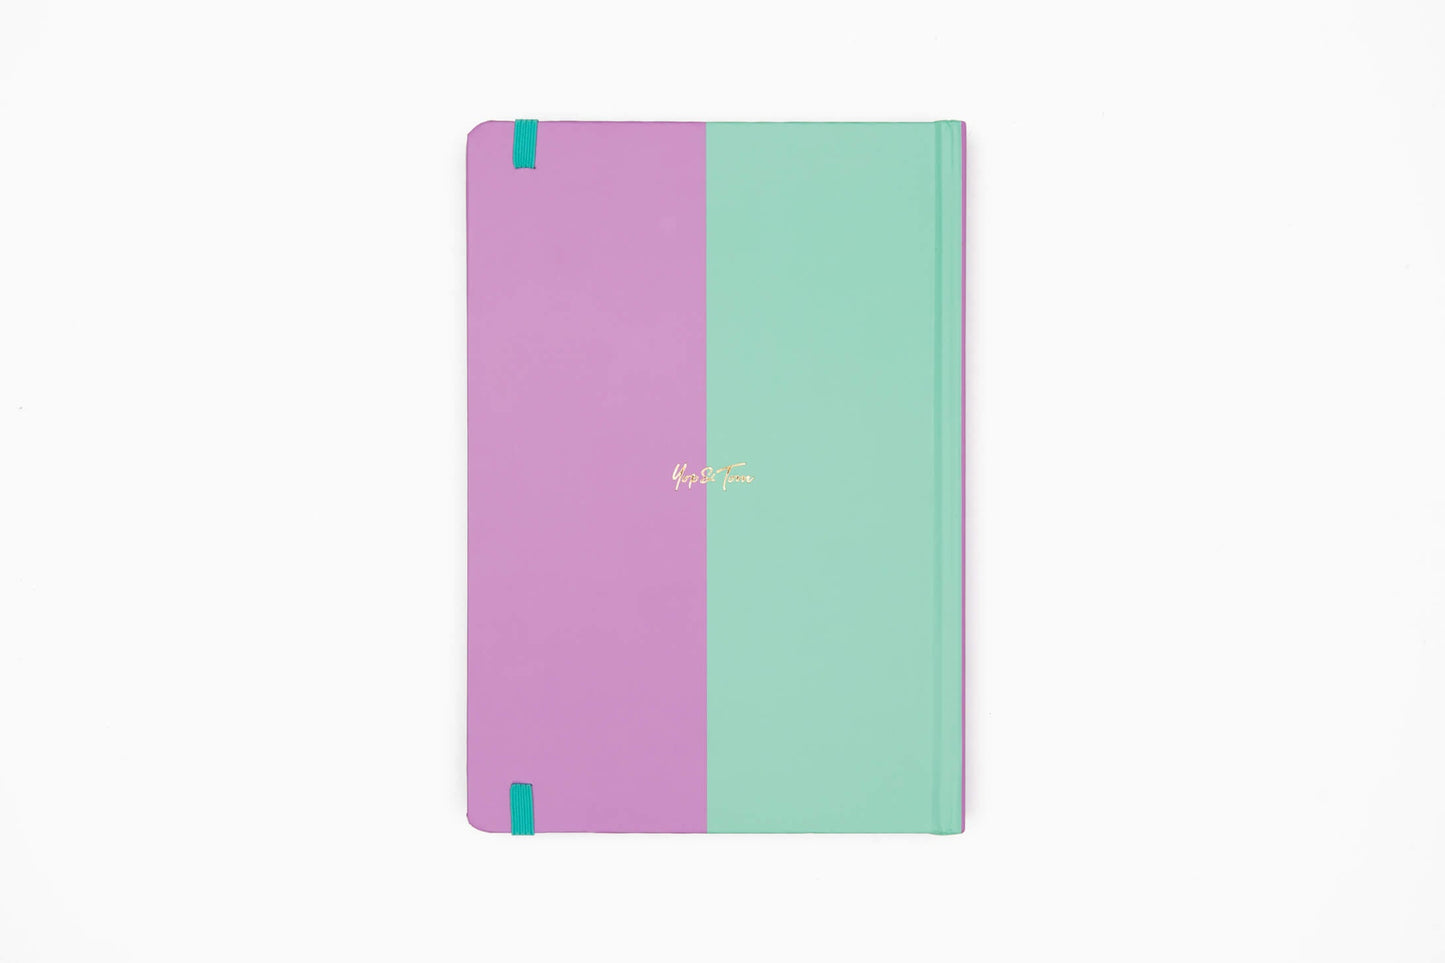 Contrast Lilac & Mint A5 Lined Notebook